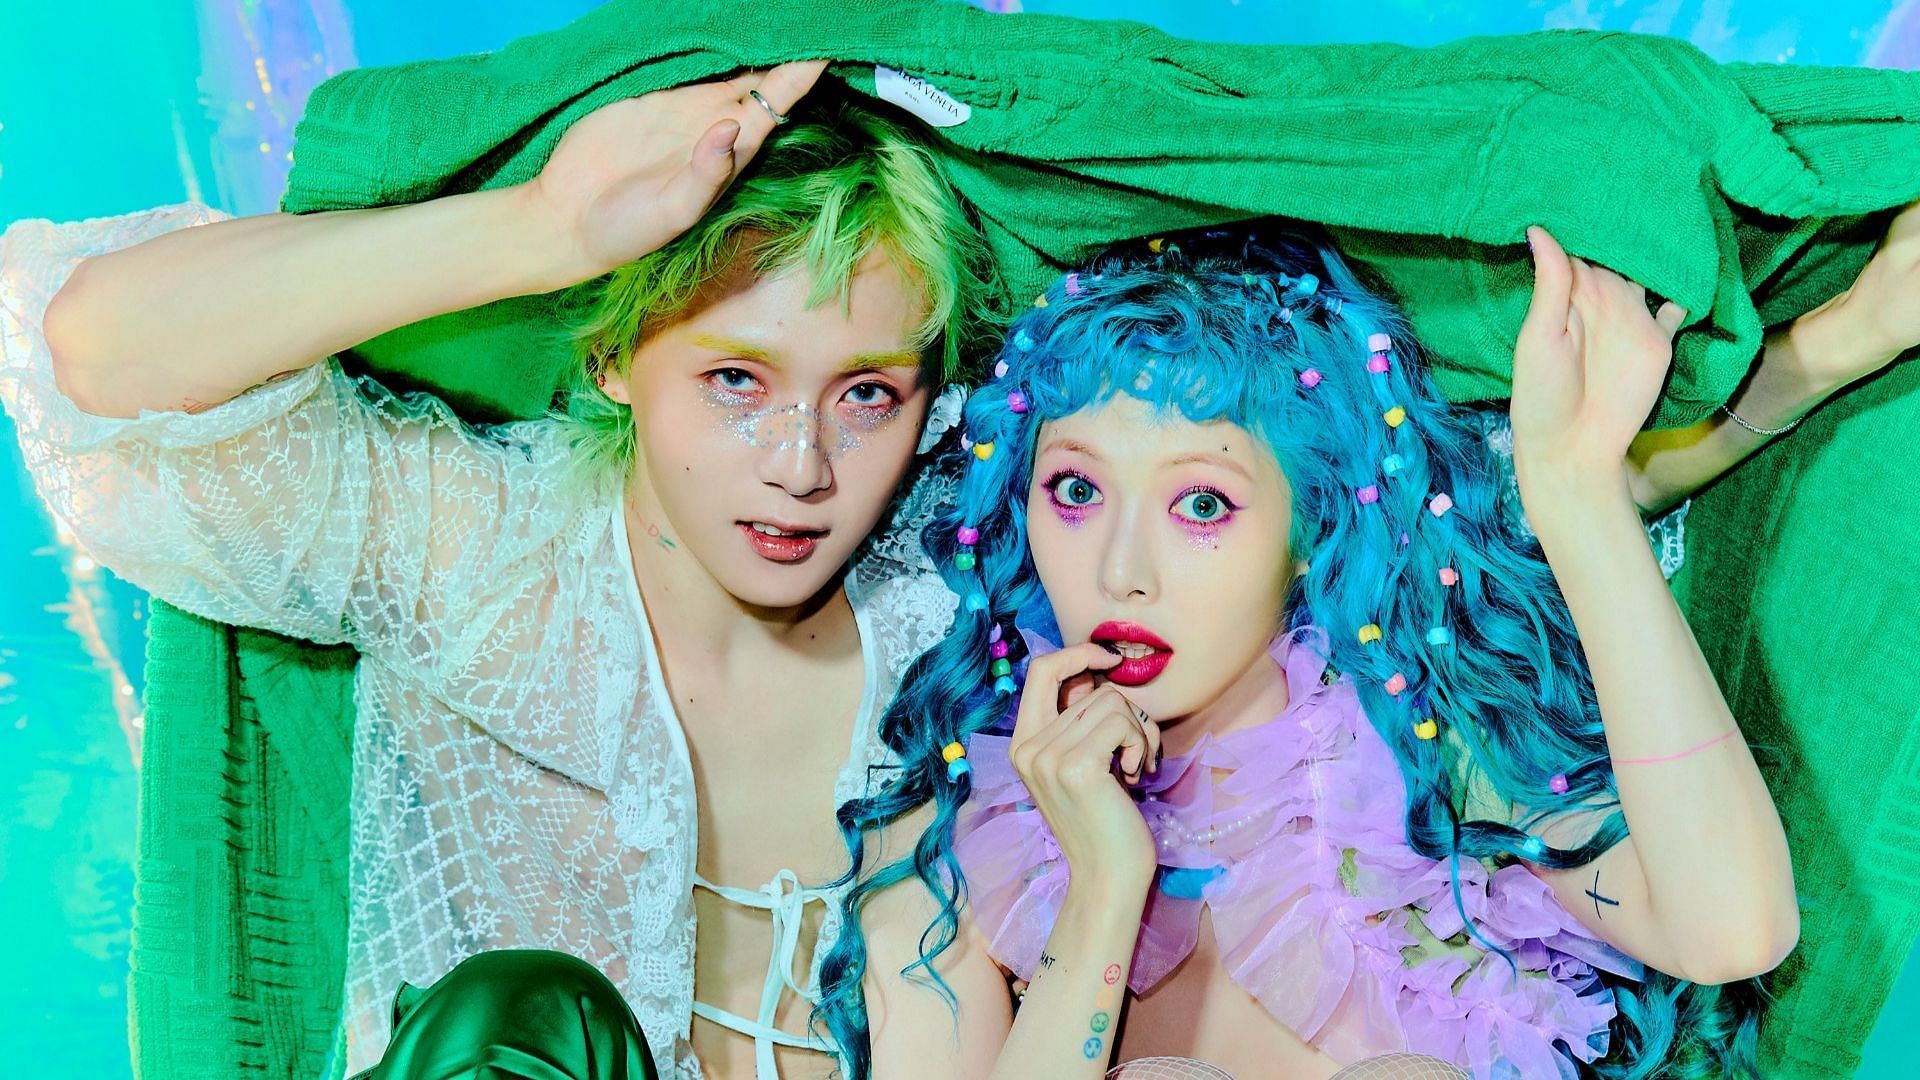 HyunA and Dawn Ping Pong Teaser image. (Image via Twitter/@OfficialPnation)